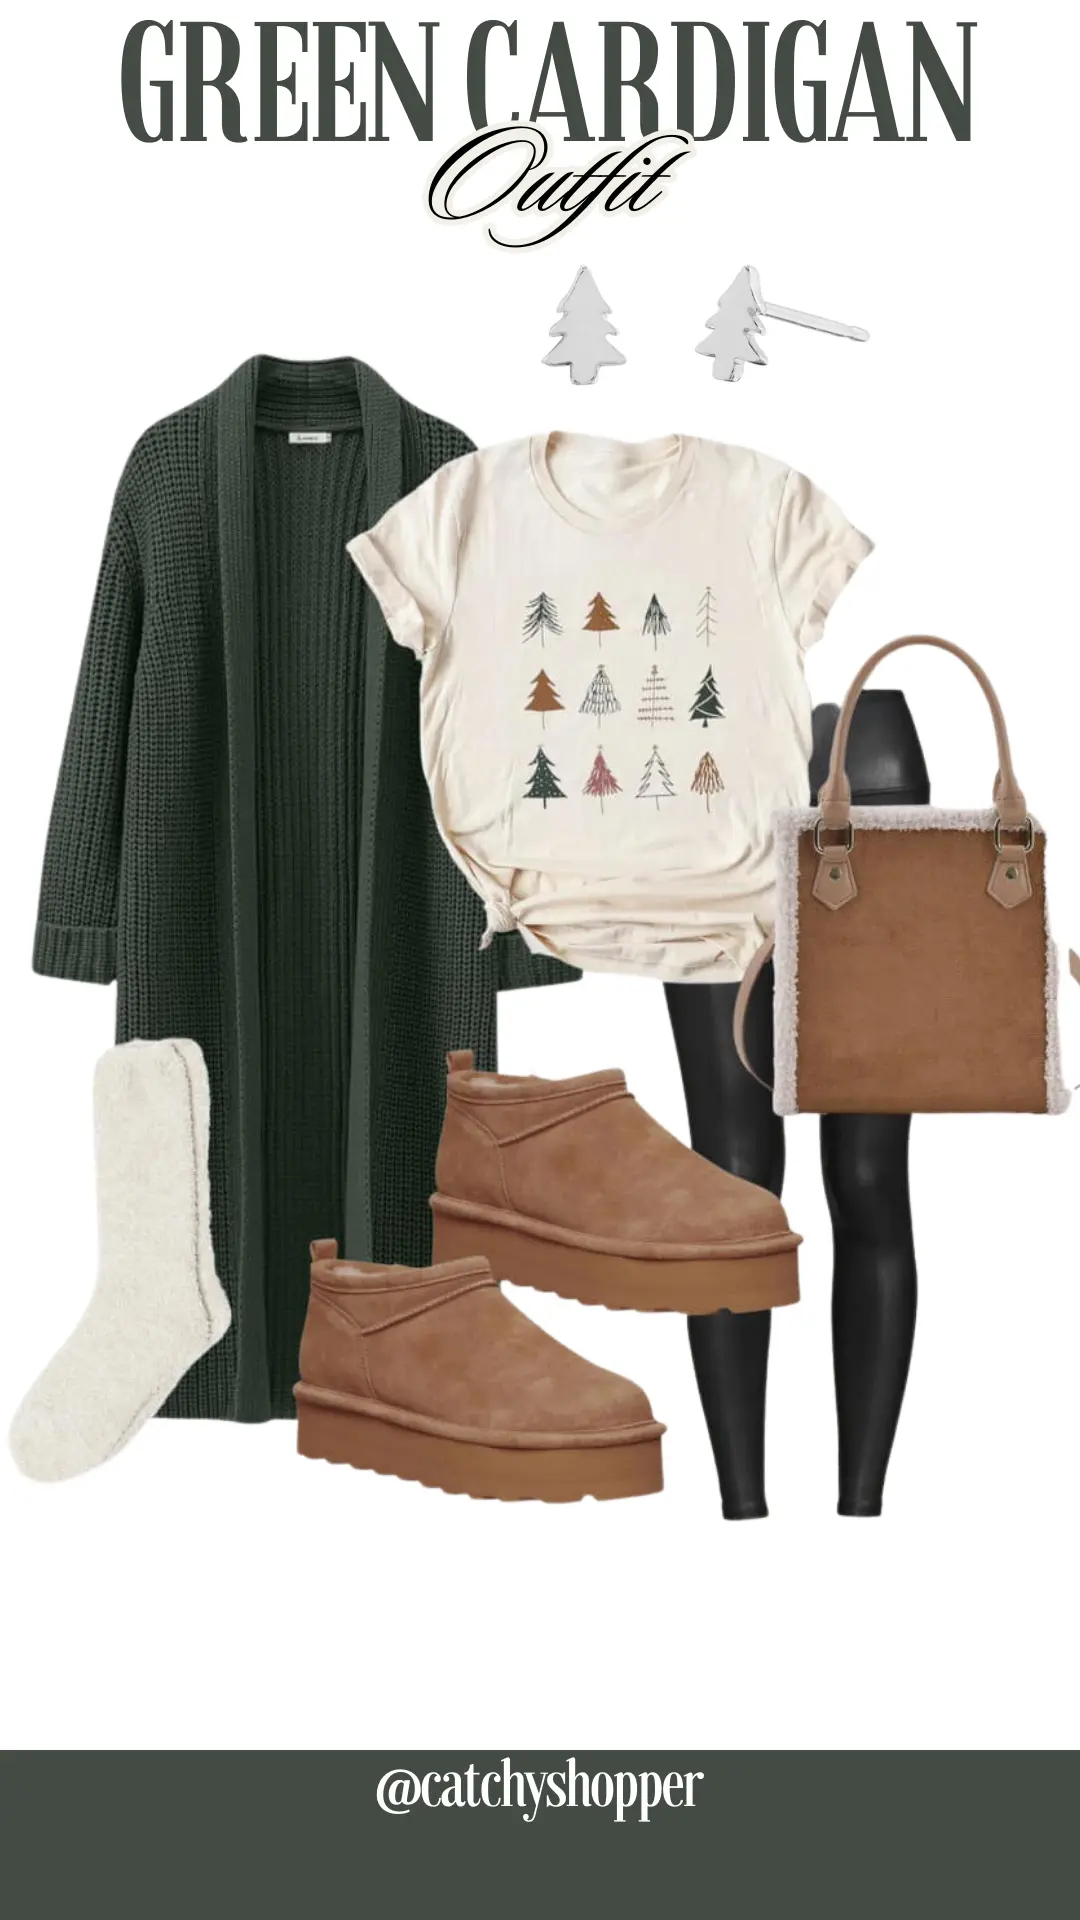 Green Cardigan Outfit